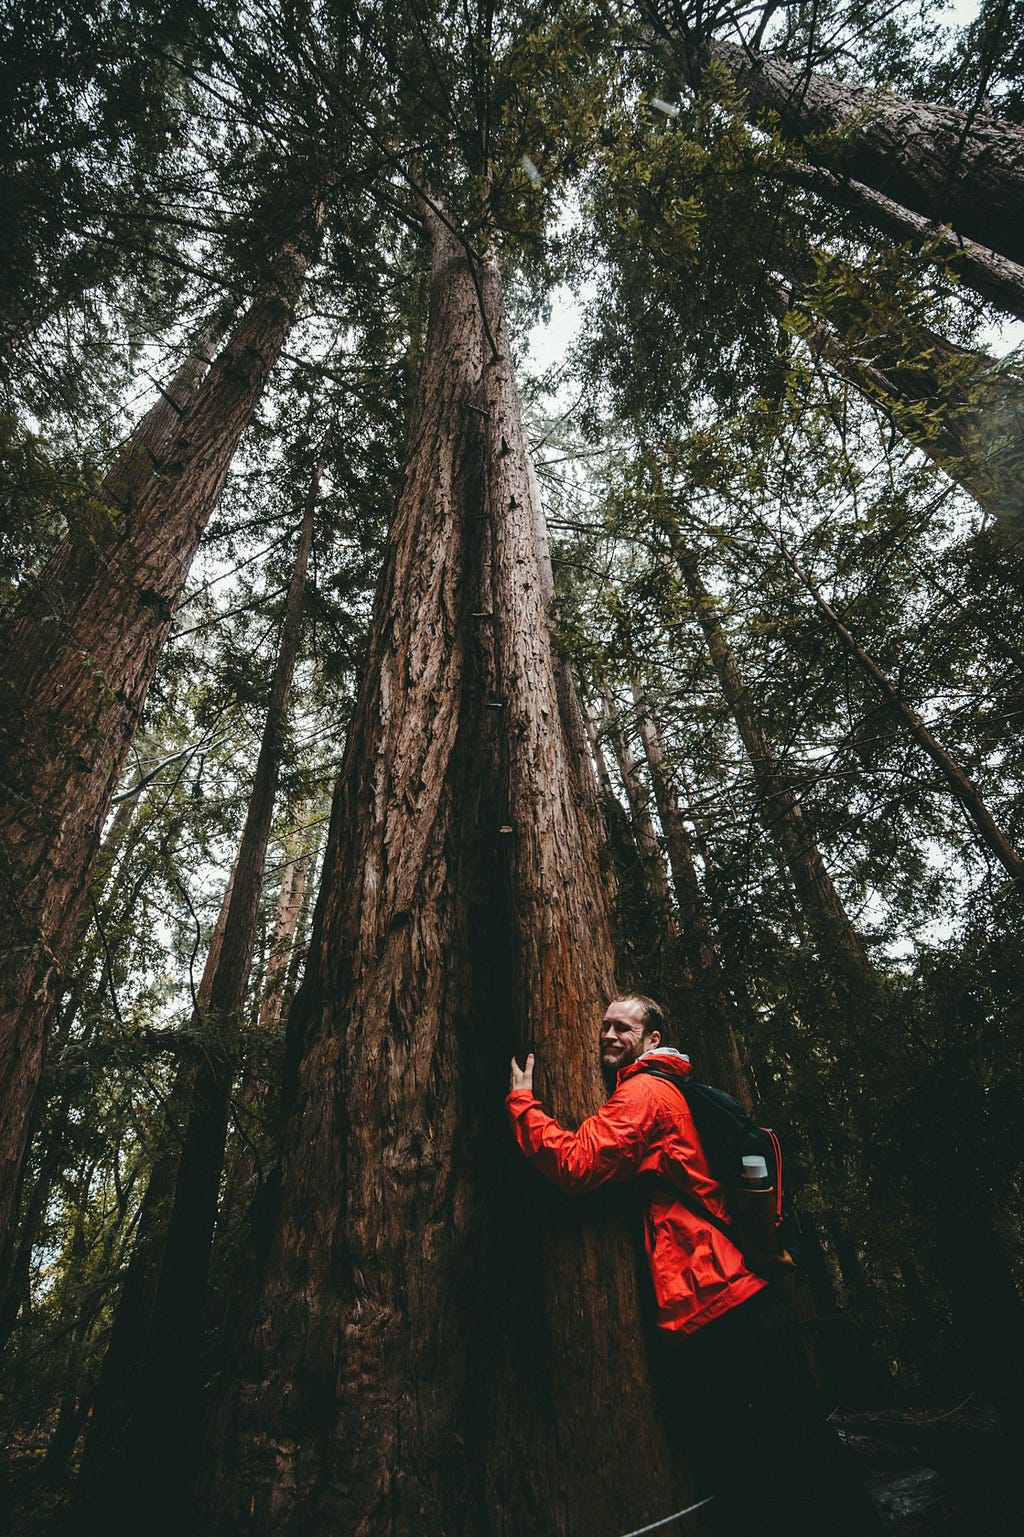 A man hugging a very tall tree in the midst of an old growth forest